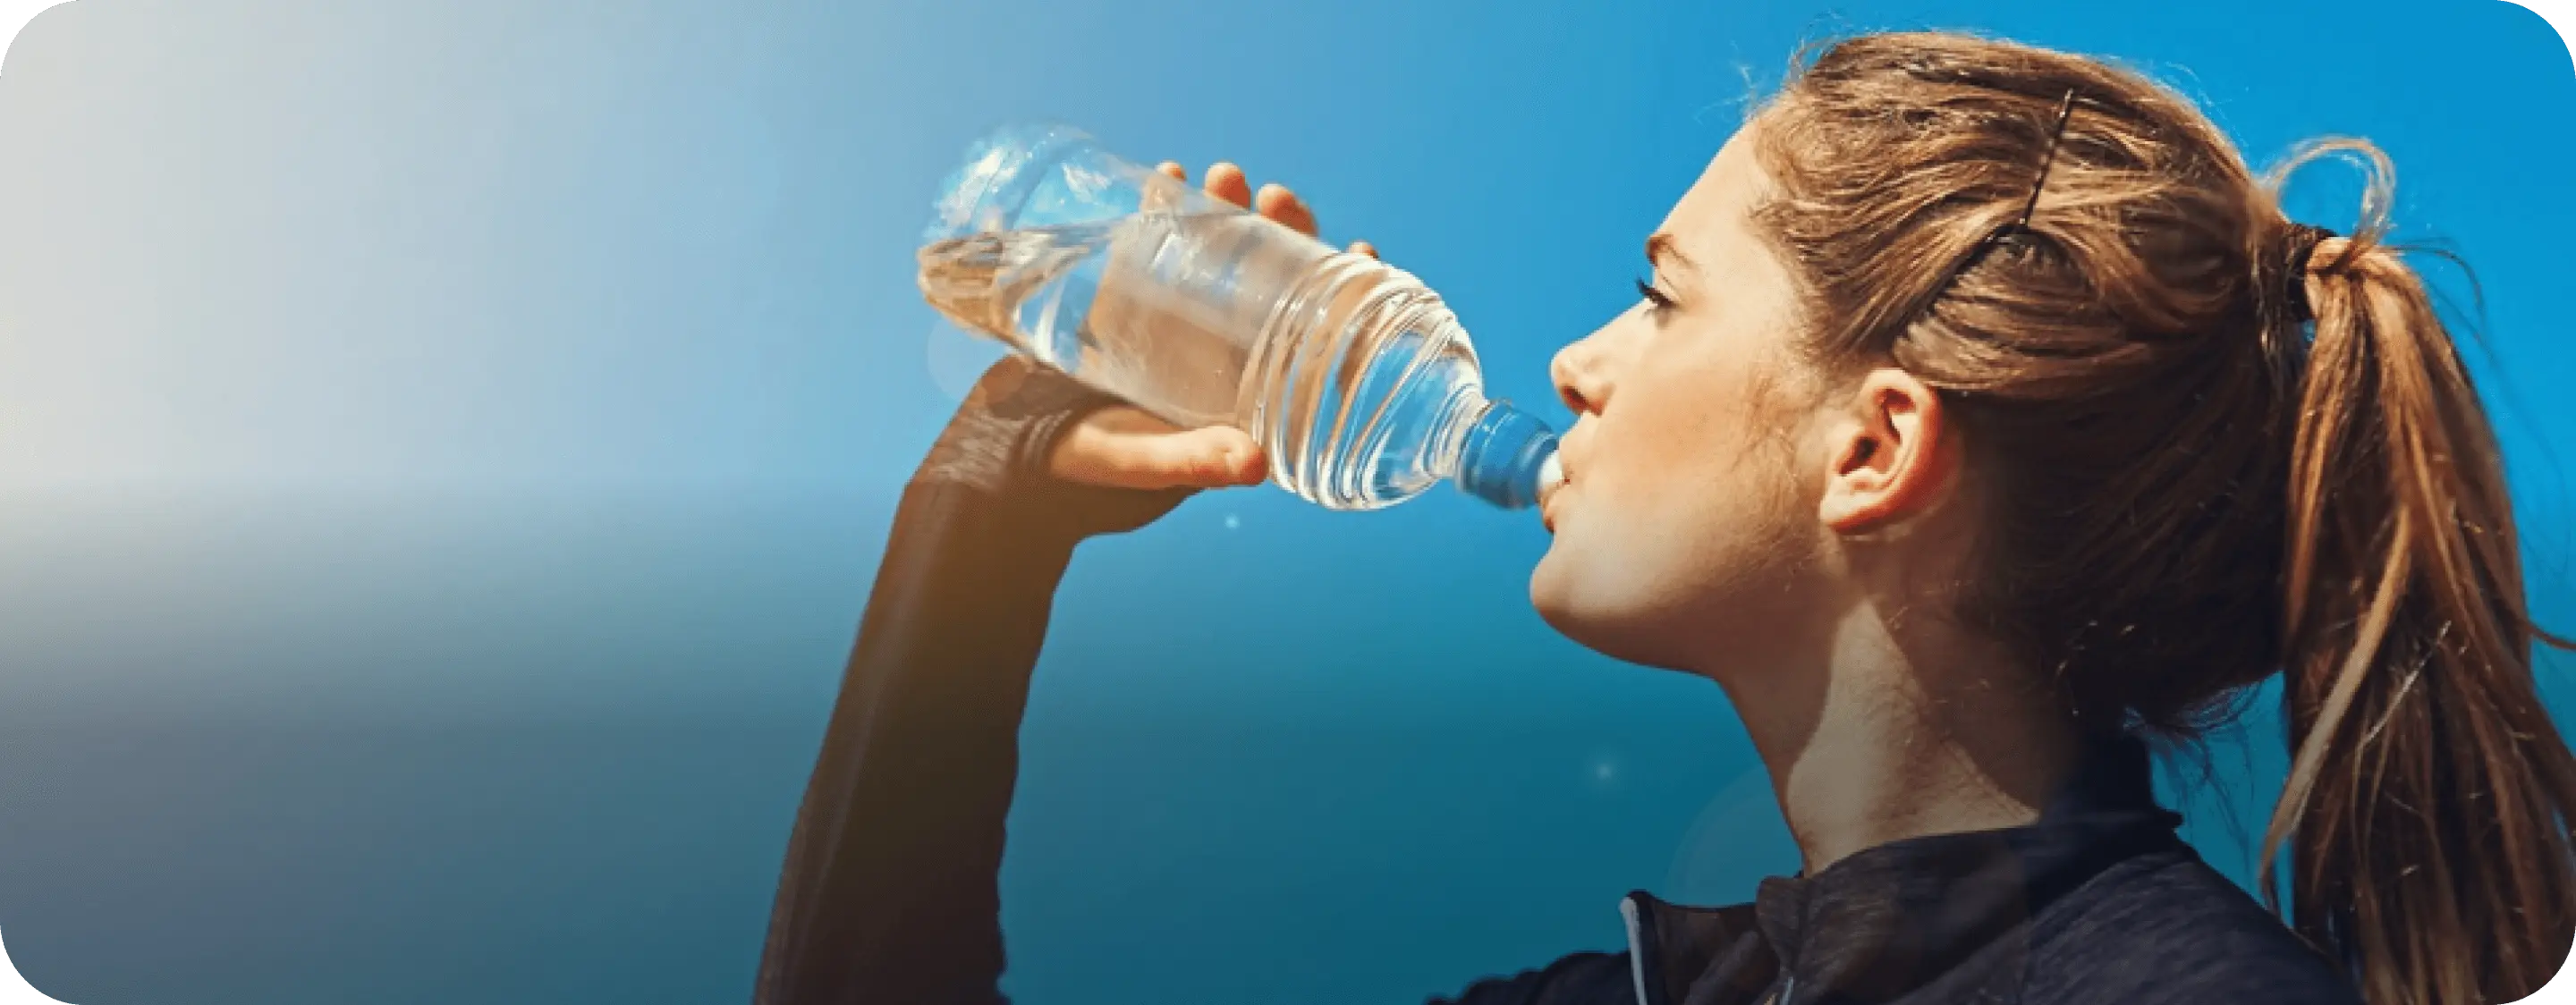 Hydration as the Key to Hangover Prevention and Relief